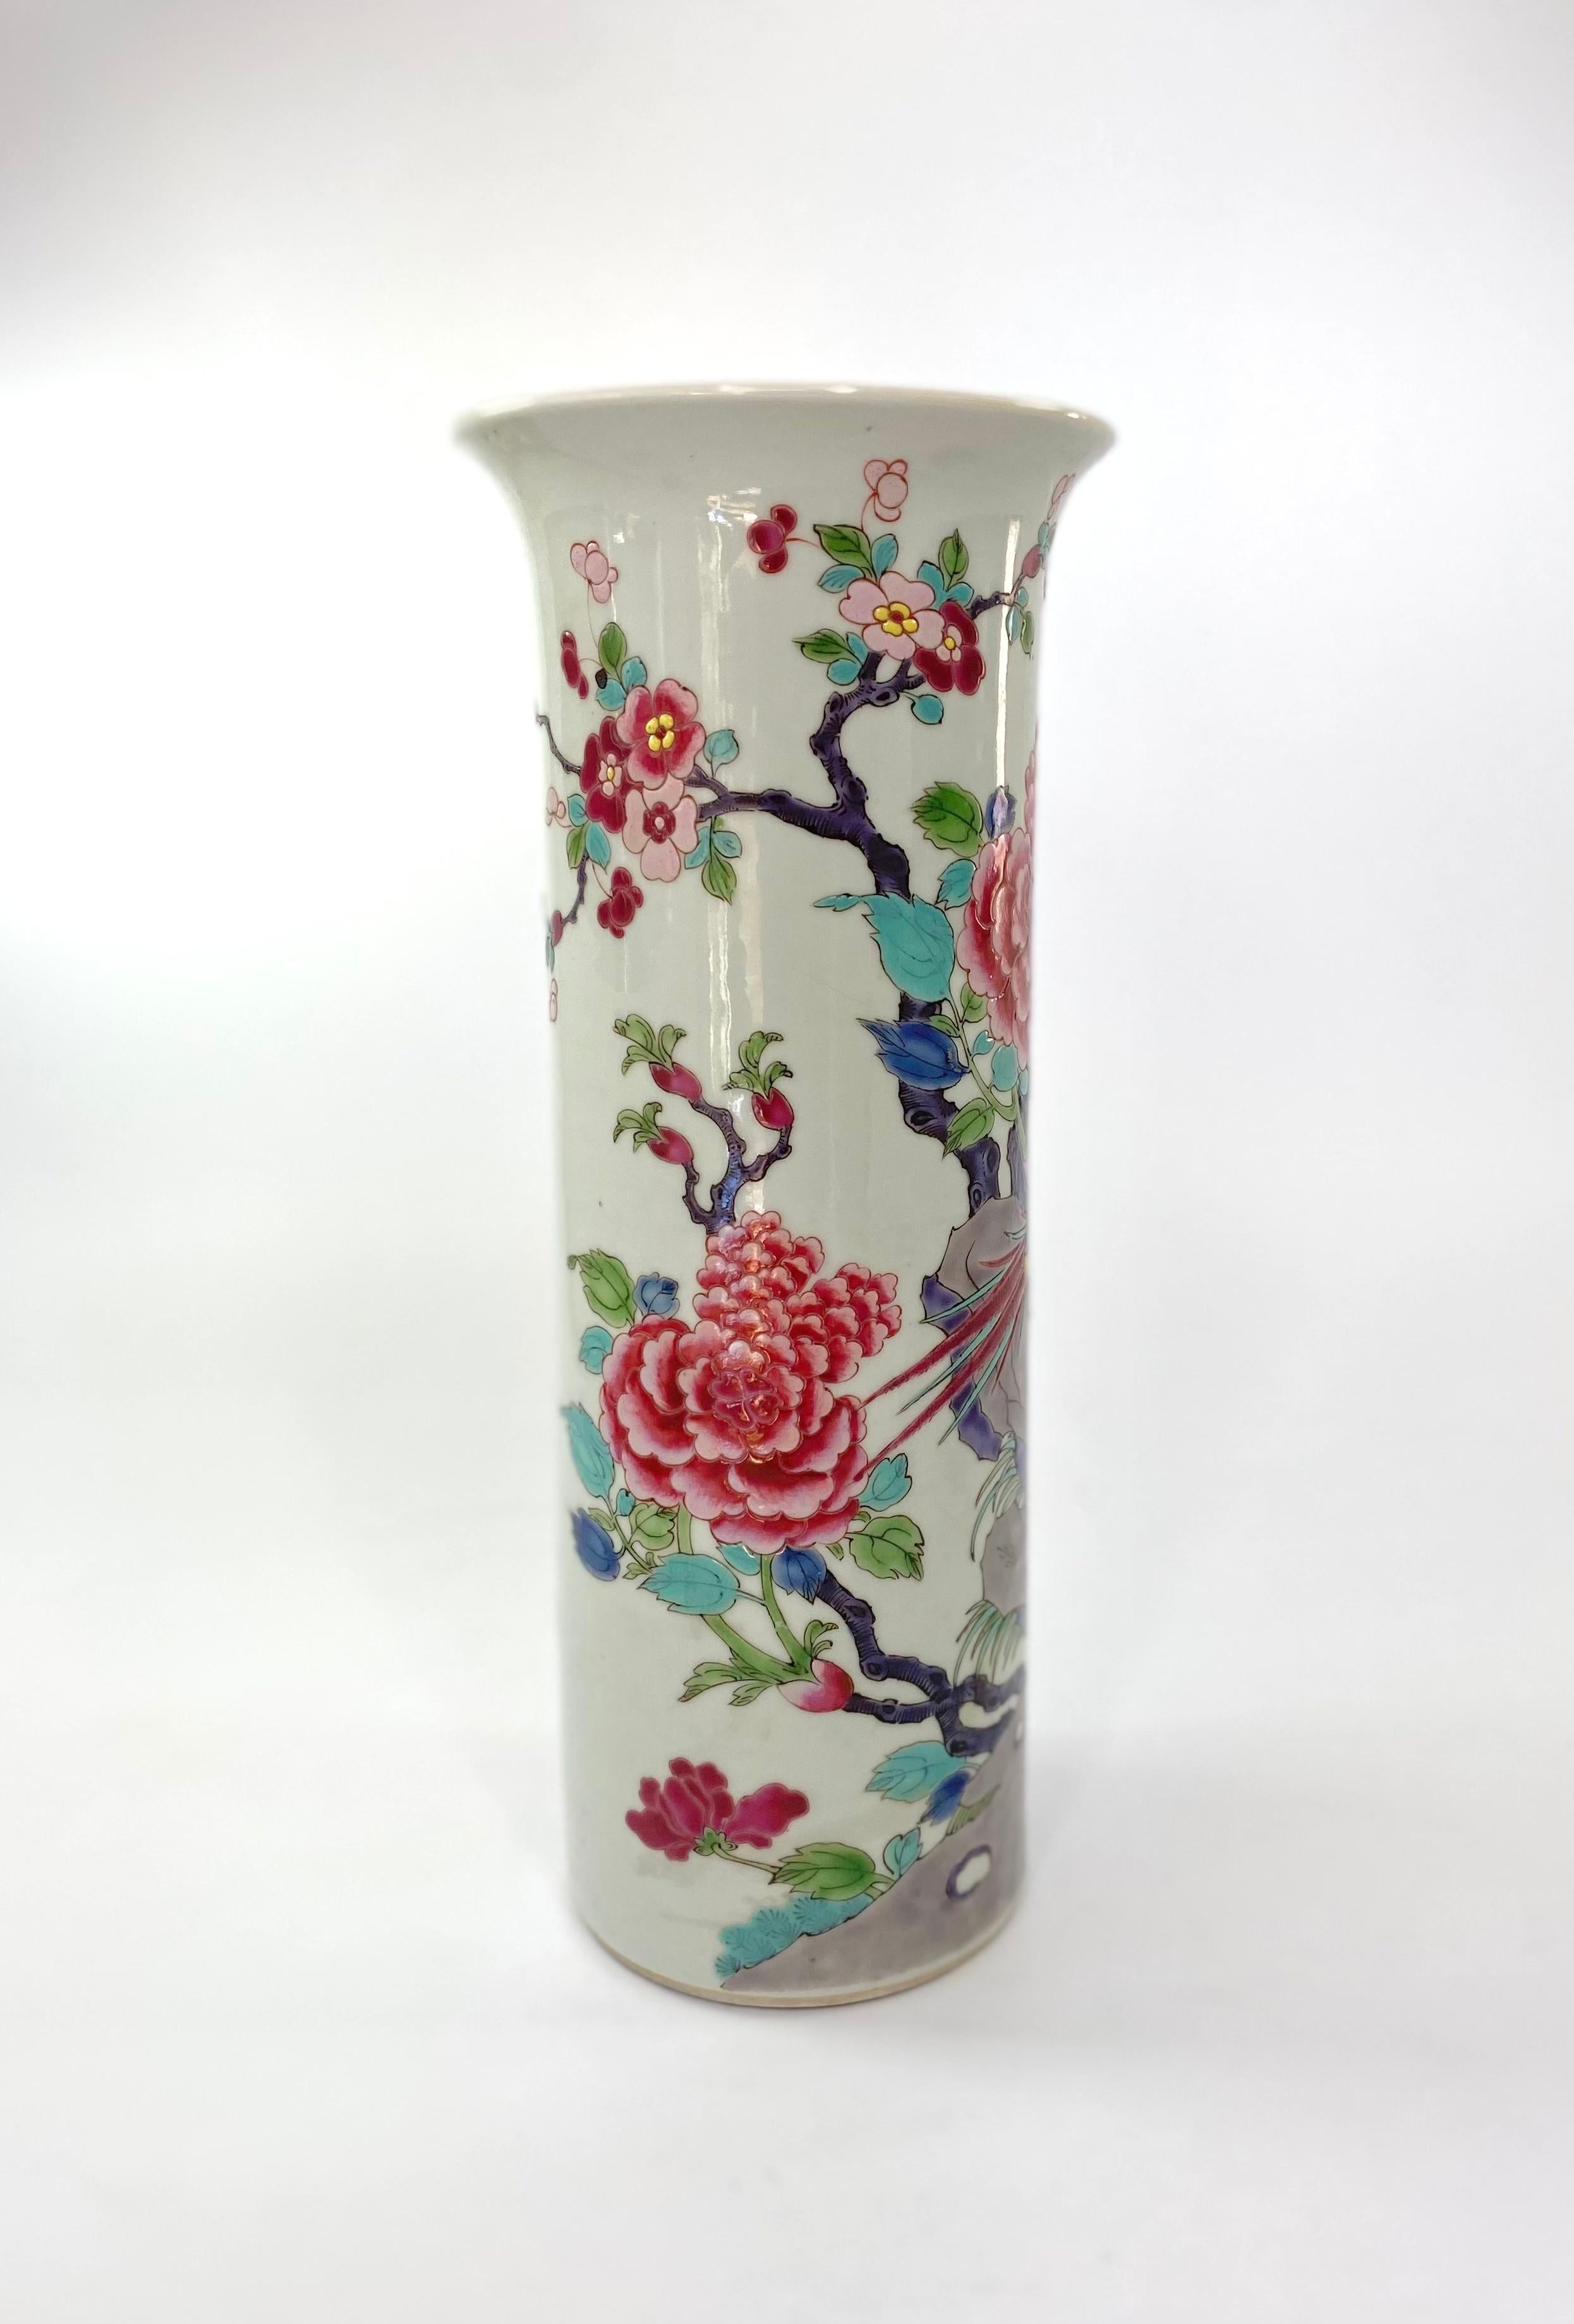 Late 19th Century Chinese Porcelain Spill Vase, Exotic Birds, c. 1890, Guangxu Period